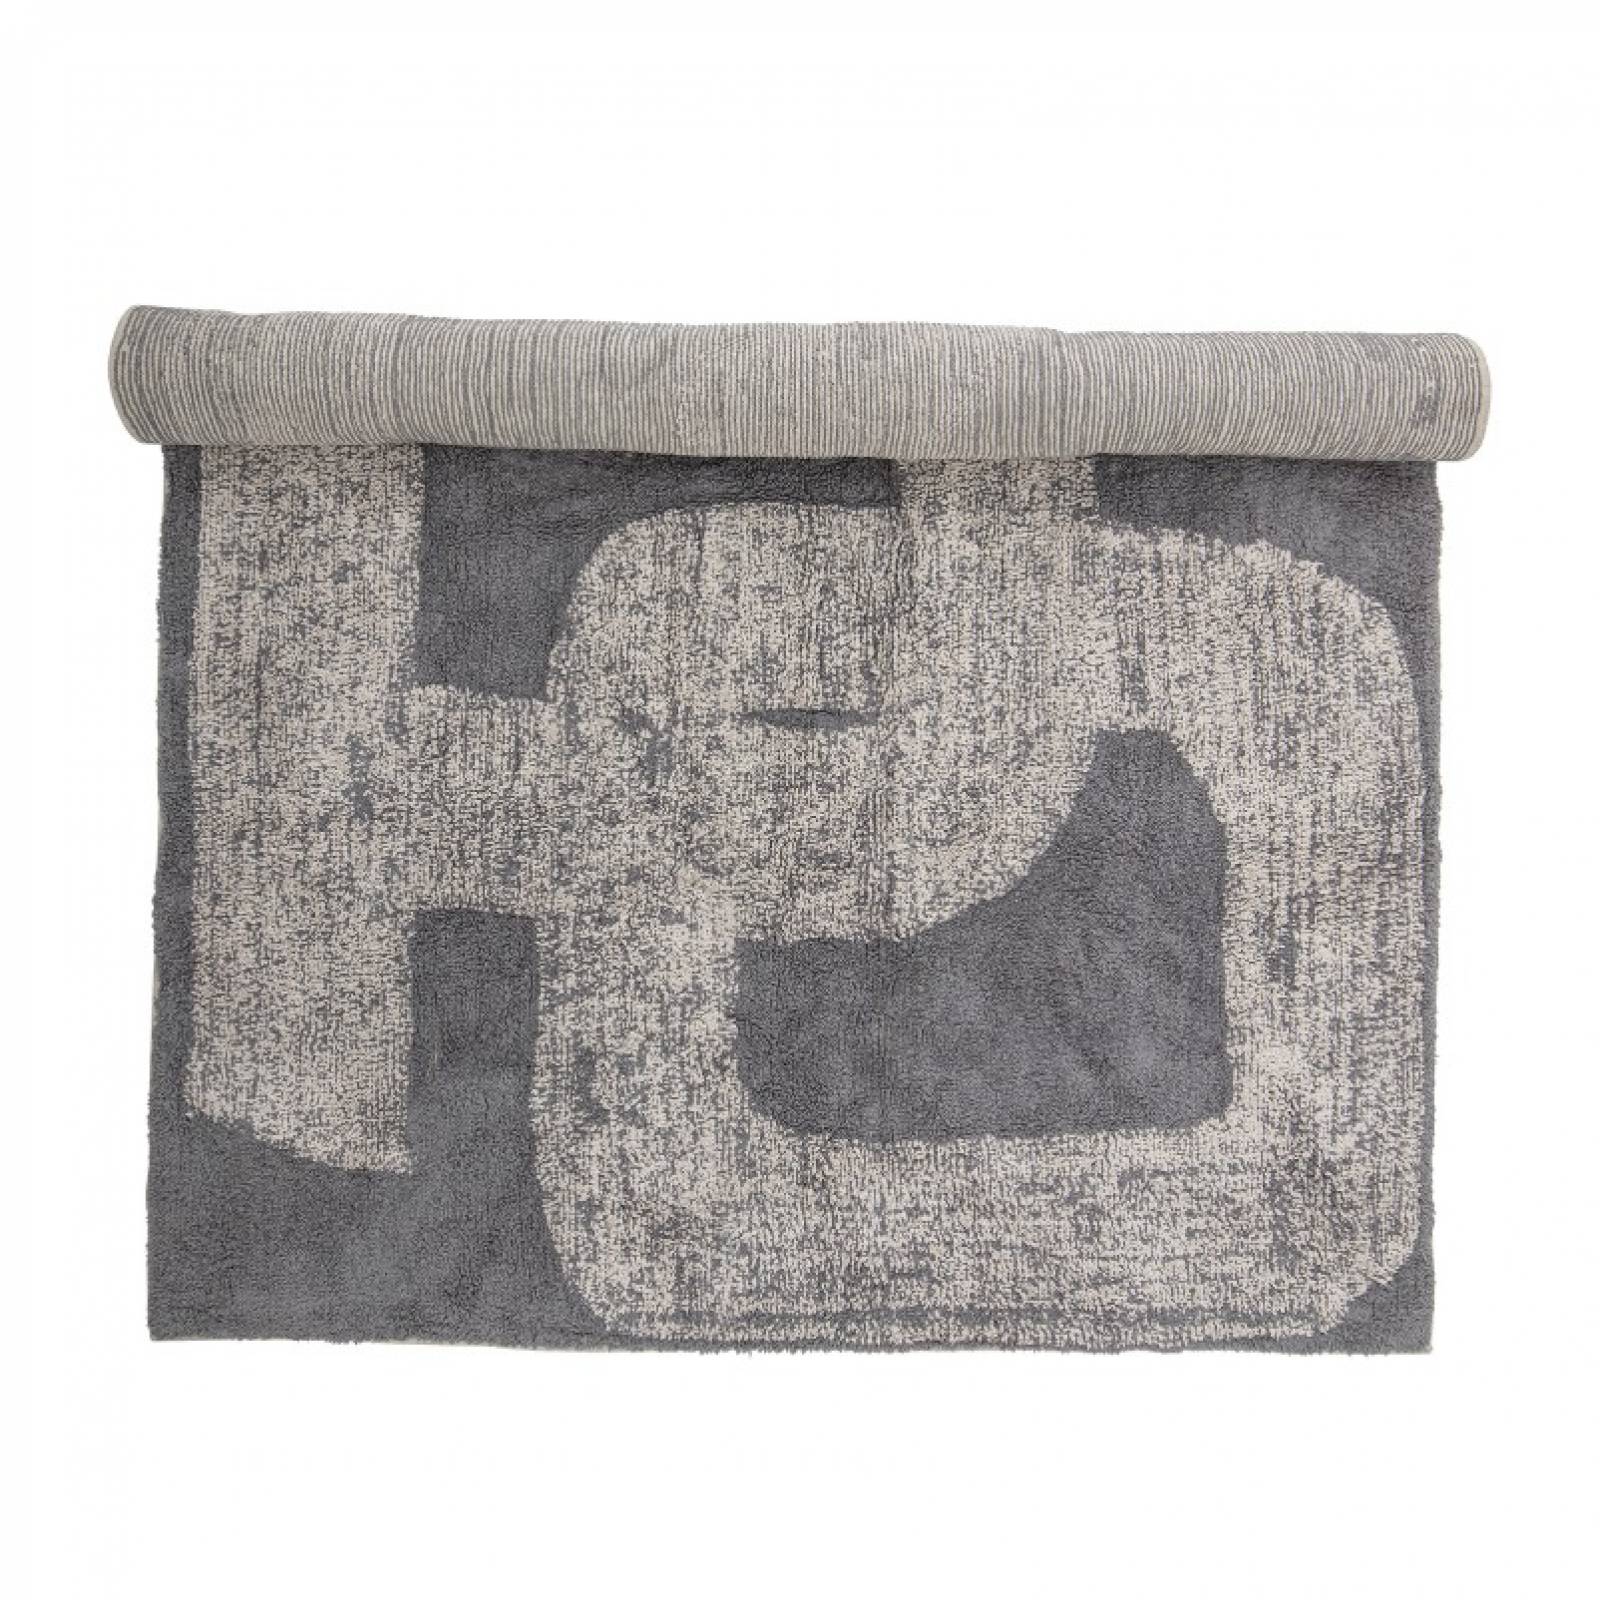 Organic Patterned Rug In Grey 200x145cm thumbnails